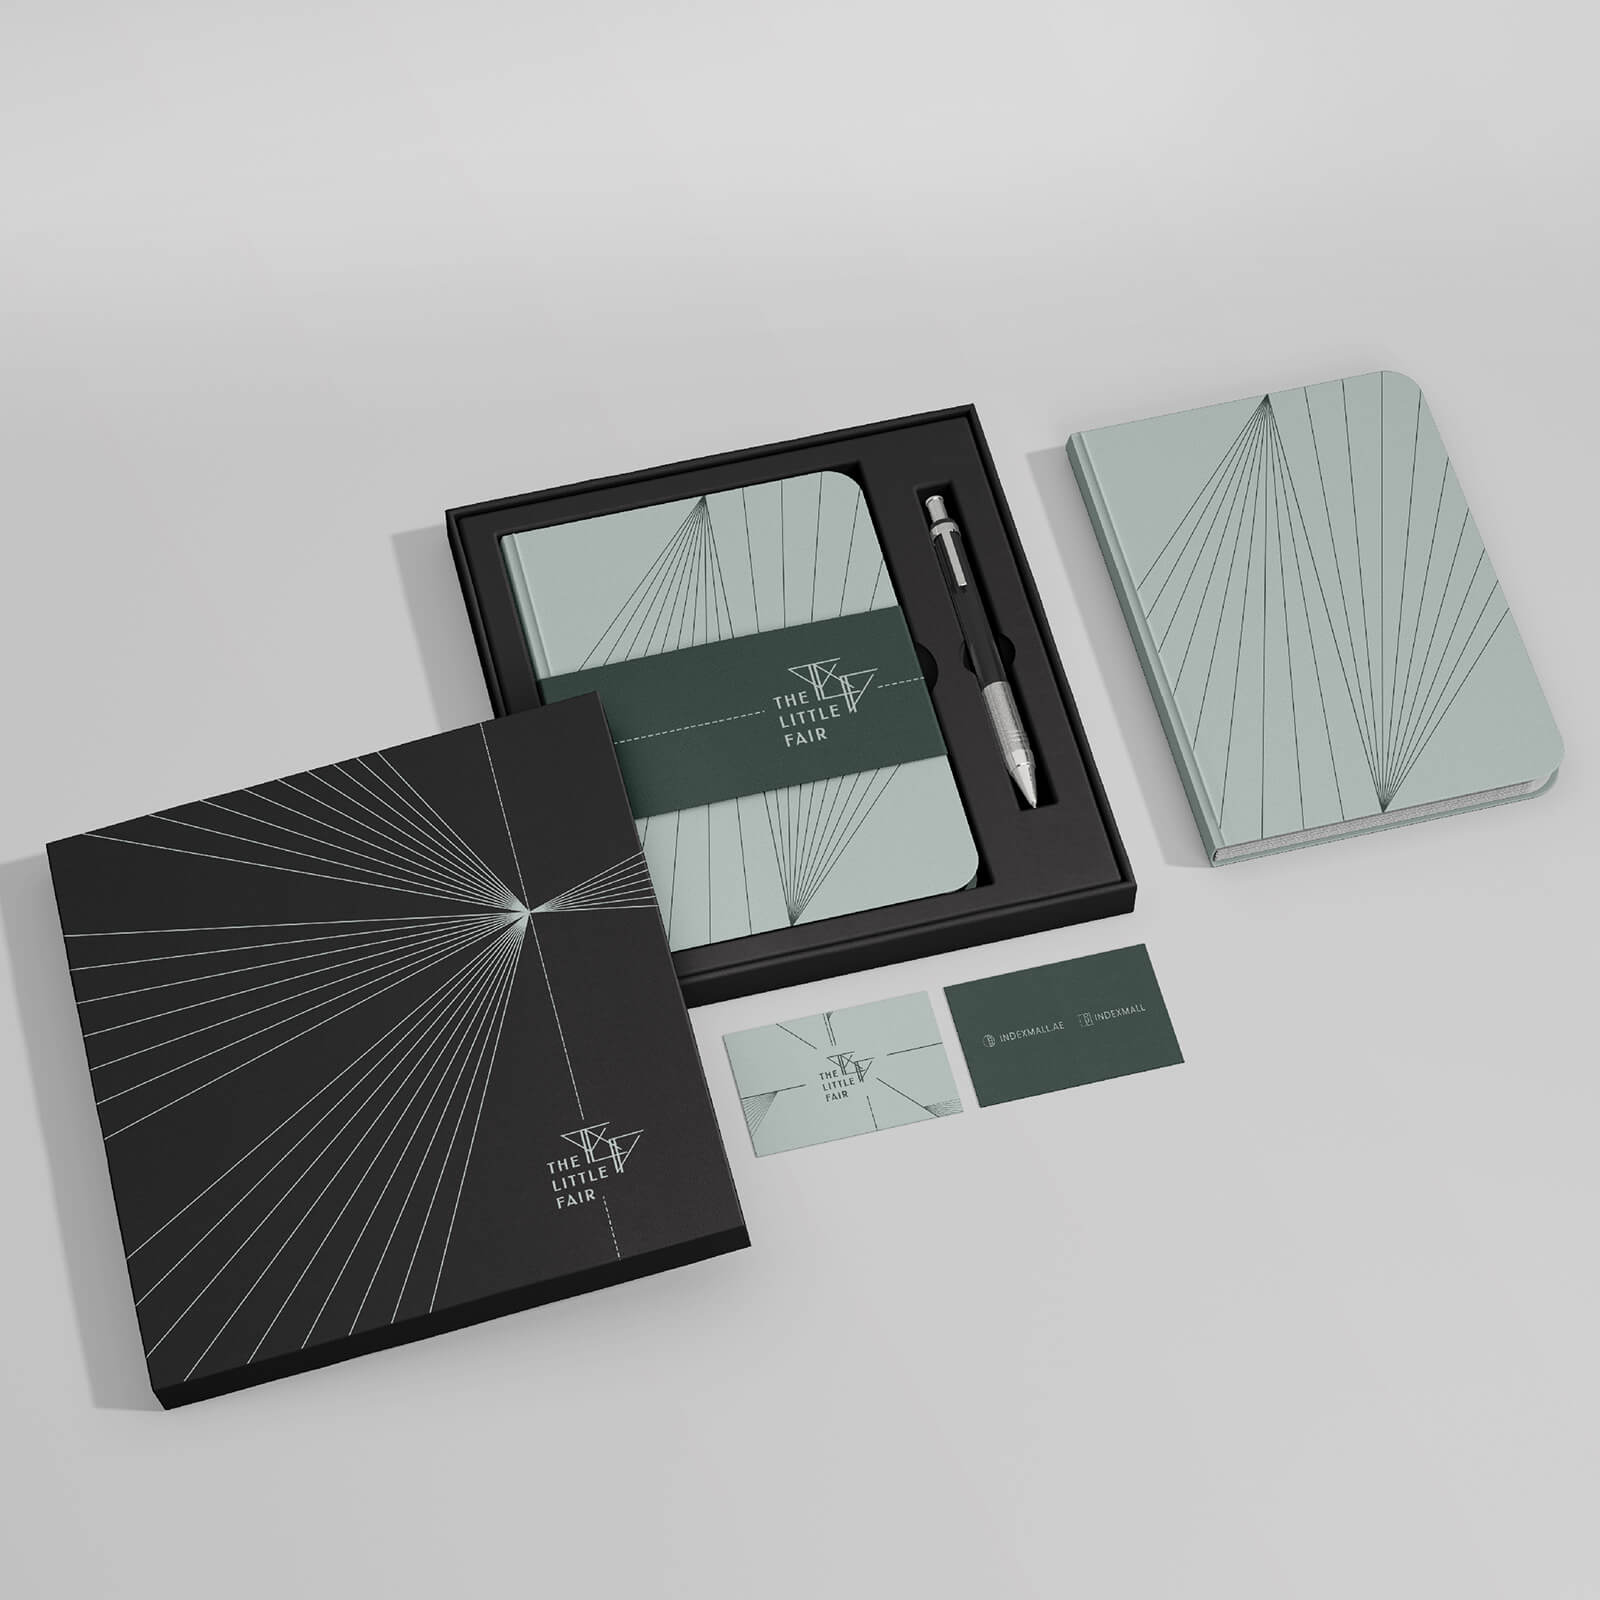 The Little Fair Stationery and Branding